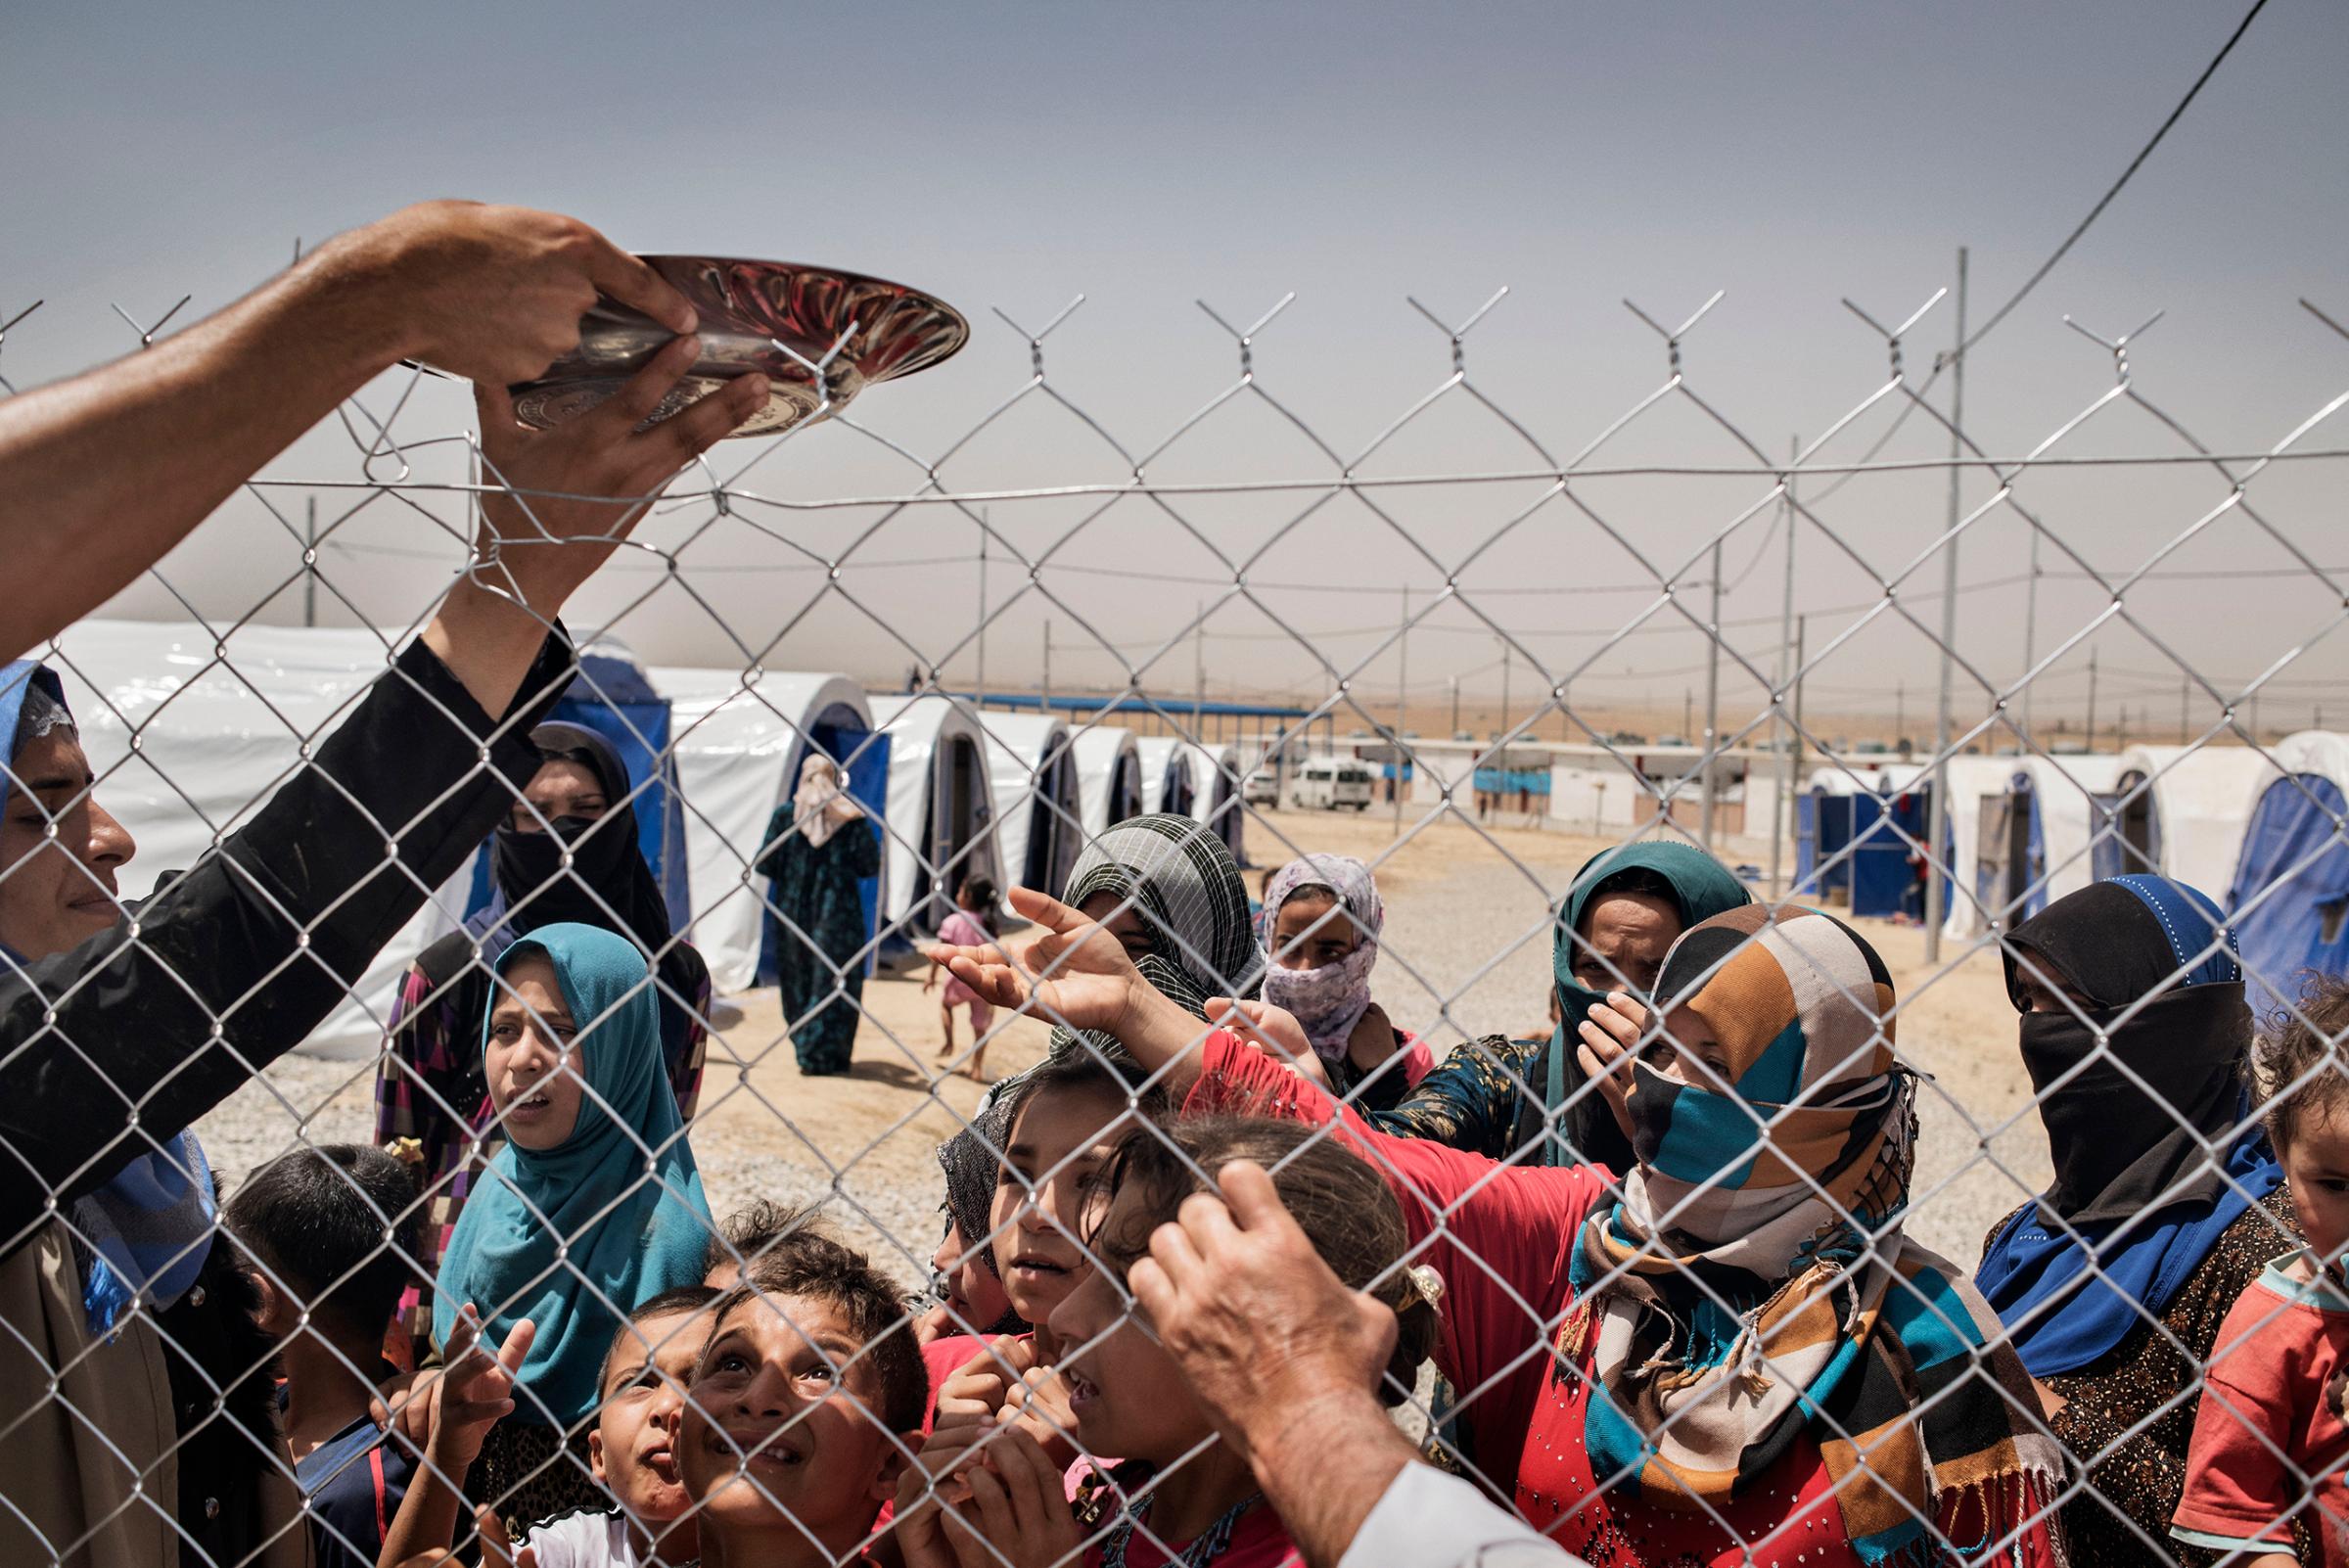 Displaced people stand in front of a fence in a camp near the Iraqi town of Makhmour, in northern Iraq, May 13, 2016. The United Nations said in April that as many as 30,000 people could be forced to flee instability in the Makhmour area, as the Iraqi military pursues an offensive against Islamic State militants in the district.